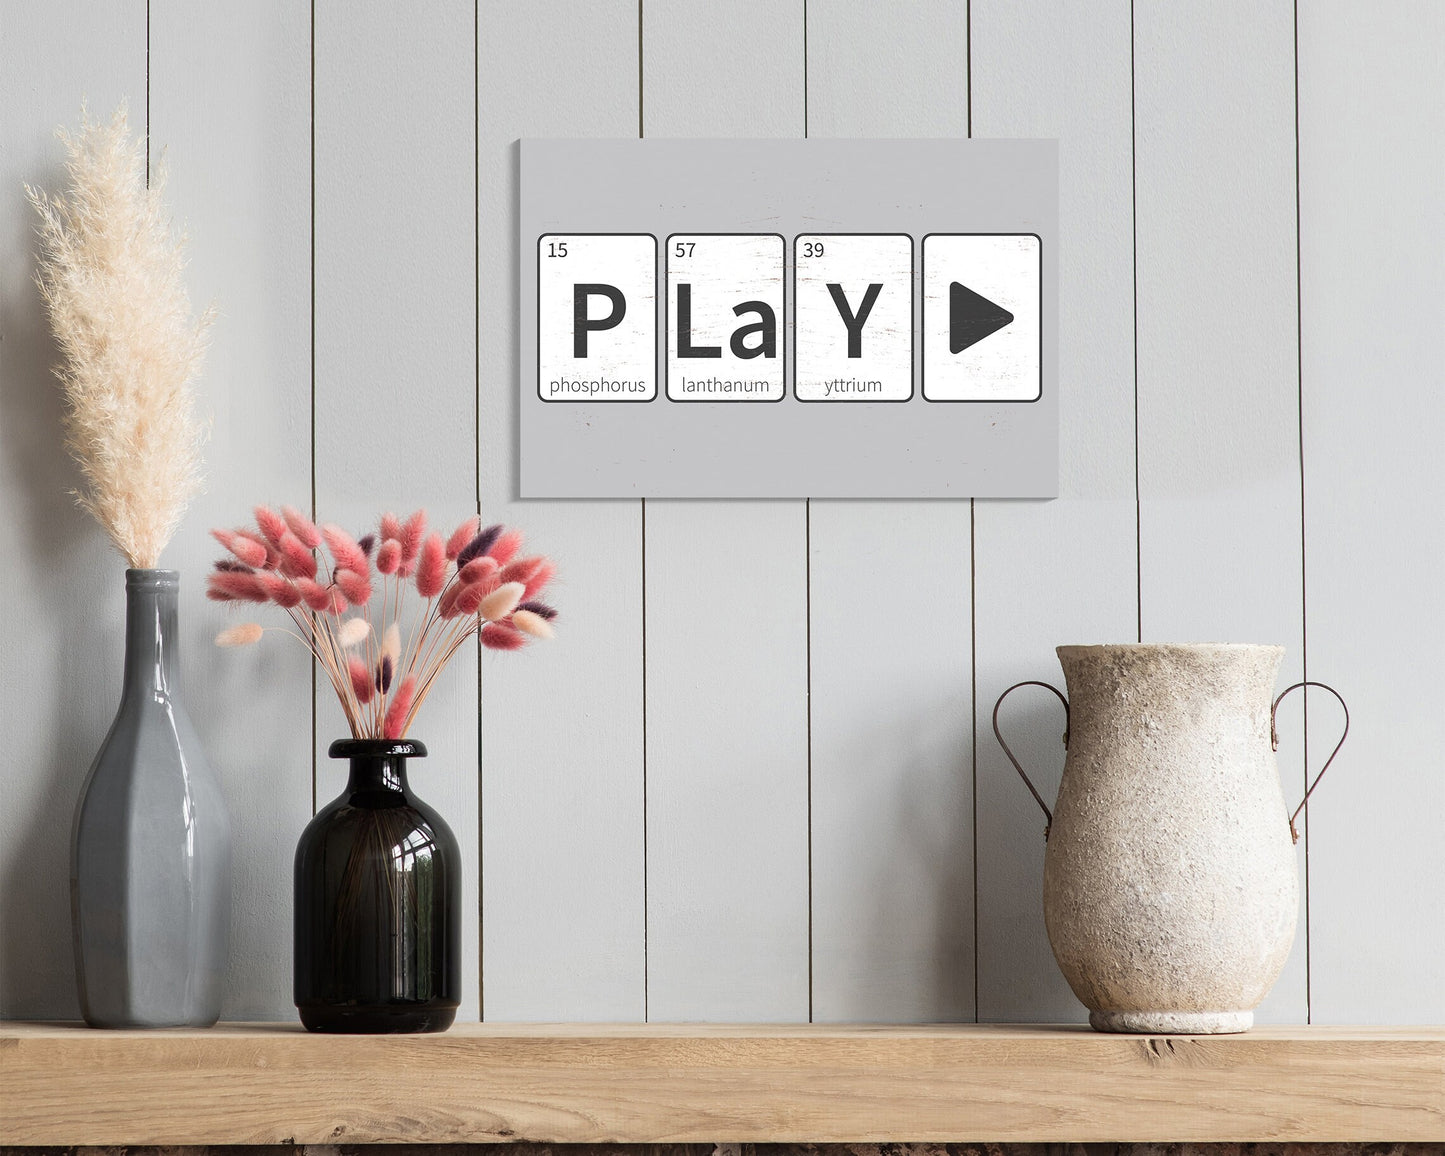 Geek Out with Chemistry: 7.5in x 5in Wooden Wall Decor Sign - "PLaYEr" Periodic Table Elements Words Chemistry Poster - Creative & Fun